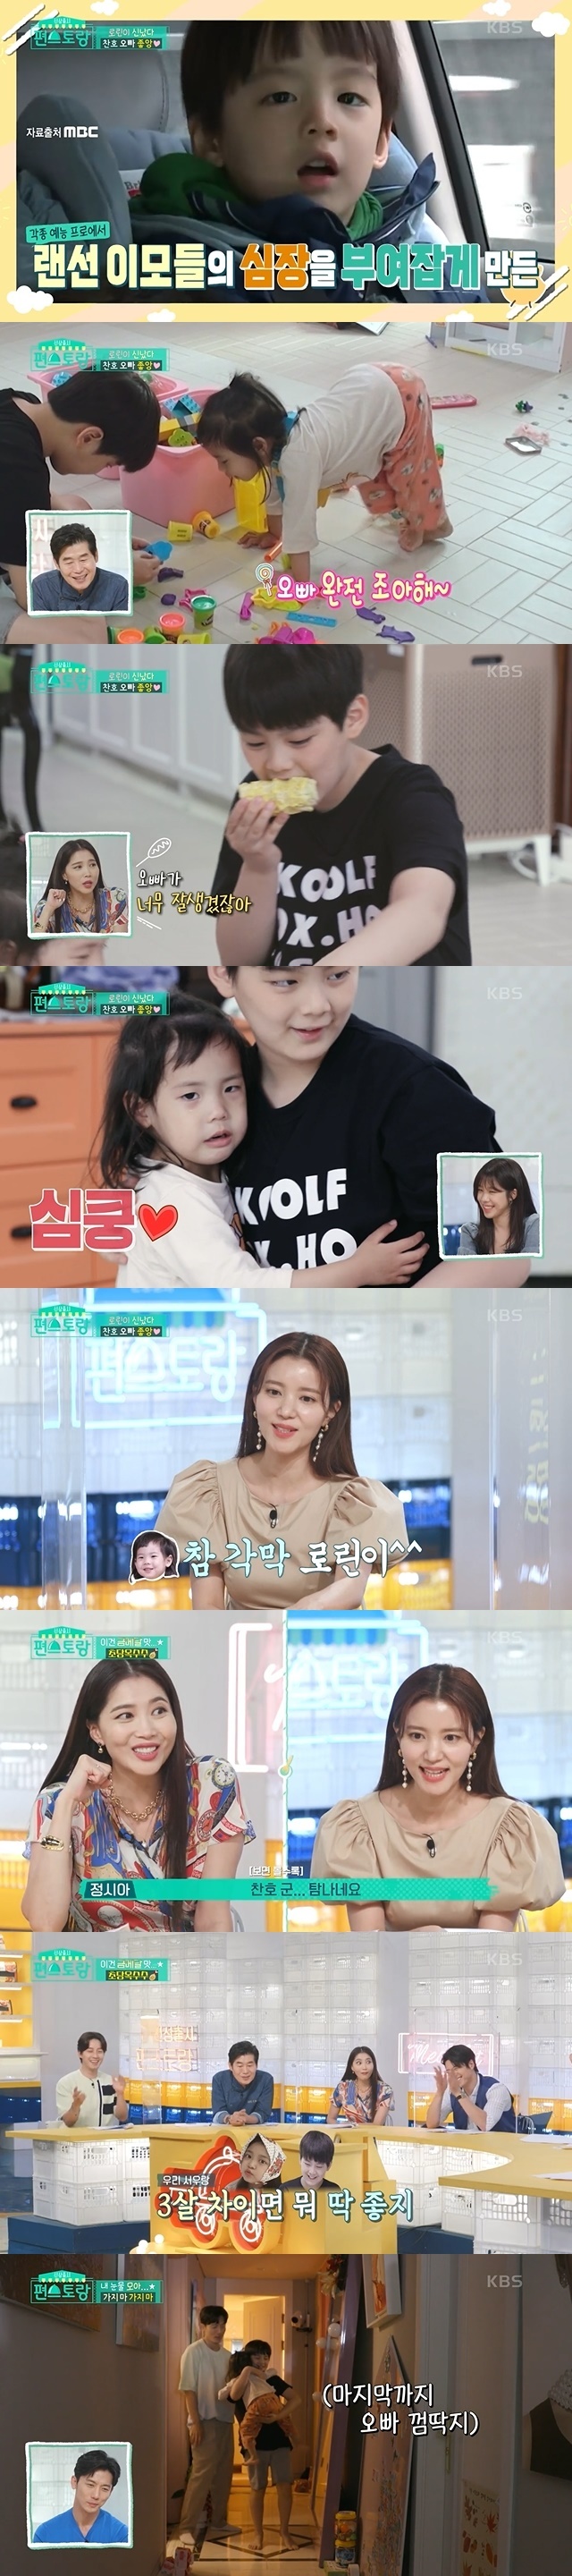 Actor Ryu Jinson Chanho still reported his welcome appearance with a warm appearance.In the 90th KBS 2TV entertainment Stars Top Recipe at Fun-Staurant (hereinafter referred to as Stars Top Recipe at Fun-Staurant) broadcast on July 30, Ki Tae-young, who invited son Chanho of neighboring cousin actor Ryu Jin to his home, was portrayed for a brief child-rearing escape.On this day, Ki Tae-young received a box of corn per second, and was worried about a short shelf life and wanted to share it with his neighbor, Ryu Jin.Ki Tae-young called Ryu Jin to confirm that the second son Chanho was alone at home, and informed him, Please tell Chanho only, I will tell him.As soon as the name Chanho was mentioned, Laurin went up, and she followed Ki Tae-young to Ryu Jins house and demanded, Chinho brother, come to my house.Later, a tribute that echoed the hearts of many Ranseon aunts appeared; still warm-looking tributes impressed the studios Si-a Jing, Oh Yoon-ah and others.Meanwhile, Ki Tae-young was worried about Chanhos dinner when he said he had no adults at home, and suggested, If you are okay, lets go to your uncles house and eat.Laureen was much more excited than before when Chan came home. Laureen followed him everywhere and continued to laugh.I said, I love it completely. Oh Yoon-ah and Si-a Jing smiled at their mother, saying, My brother is so handsome, and I know that children are handsome.Chanho had a good time making watermelon flowers with Rohi and Laurin, and Chanho also showed the sense of making ice water into strawberry milk for Rohi and Laurin who could not eat carbonated.And Ki Tae-young was so happy to be able to concentrate on kitchen work while Chanho was playing with his two daughters.A friendly chant, who looked after the children well in a warm appearance, eventually stole the studios Si-a Jeongs heart; Si-a Jeong said, Chanho County covets.The age is just right for the difference of three years, he said, expressing his desire to associate with his daughter Seo.On this day, when Chanho said goodbye to the school, he was sobbing. Chanho continued to admire her as she hugged and comforted her until the end and left her house.